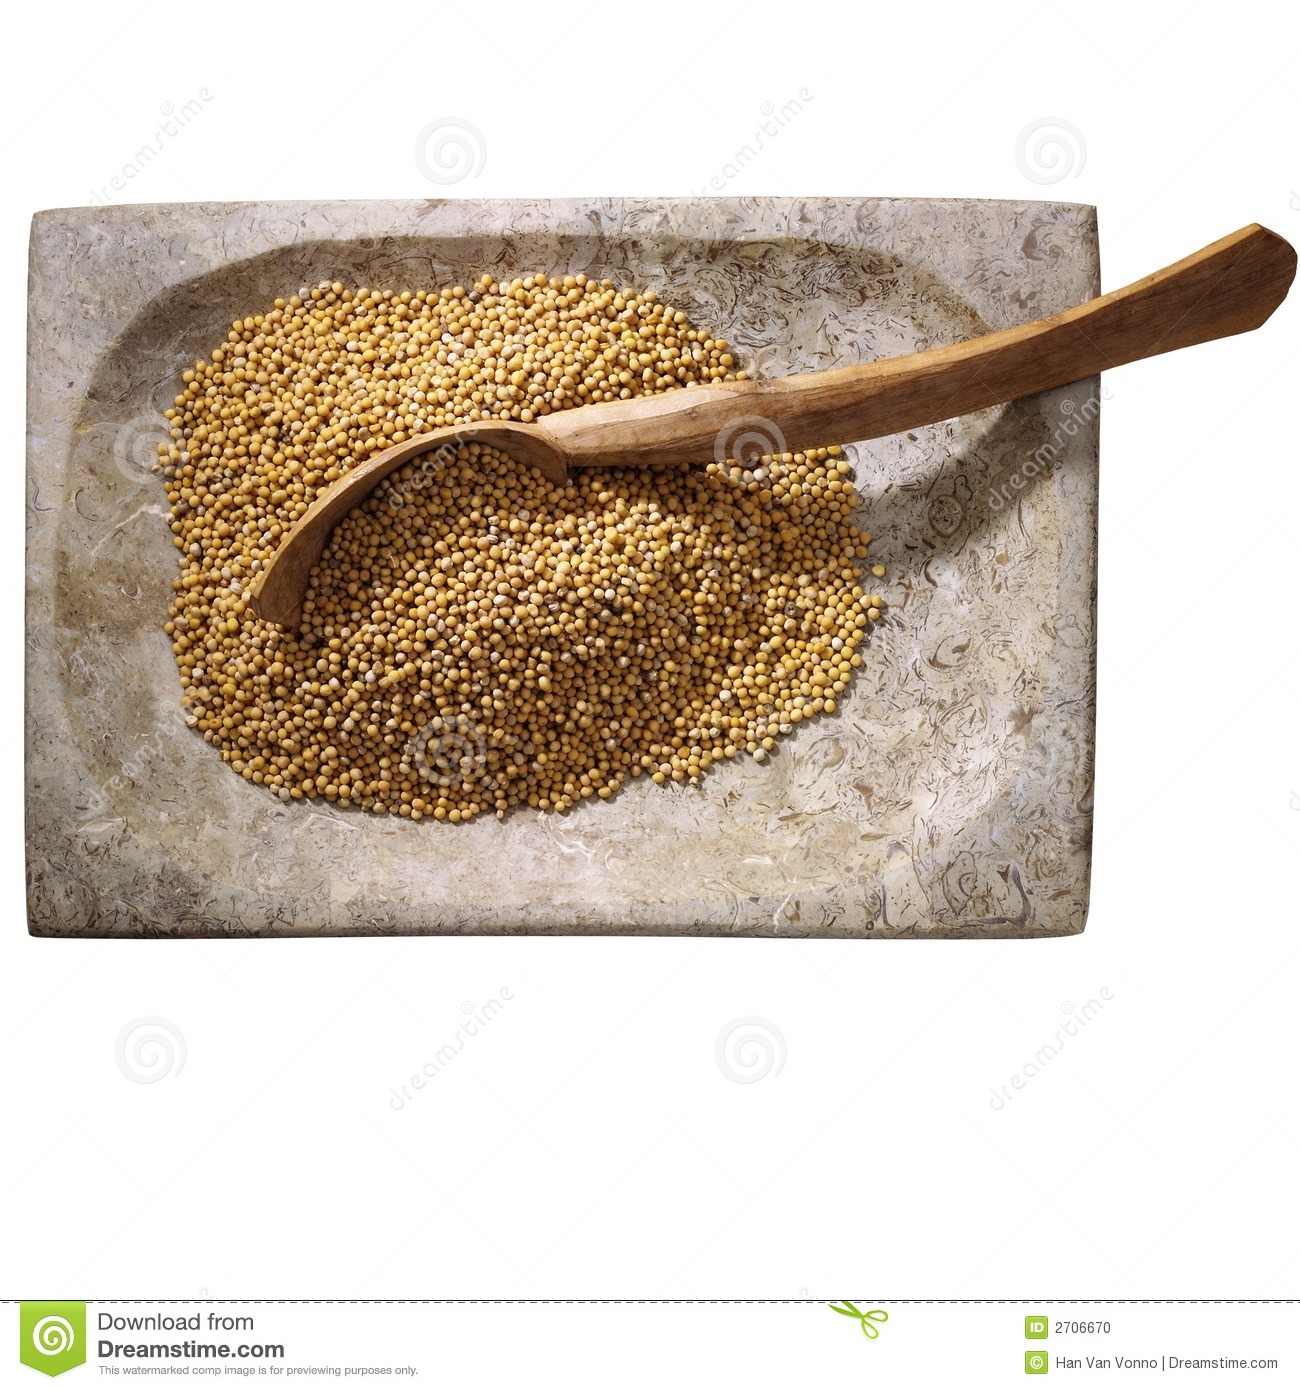 Mustard Seed On A Stone Plate With A Wooden Spoon In It